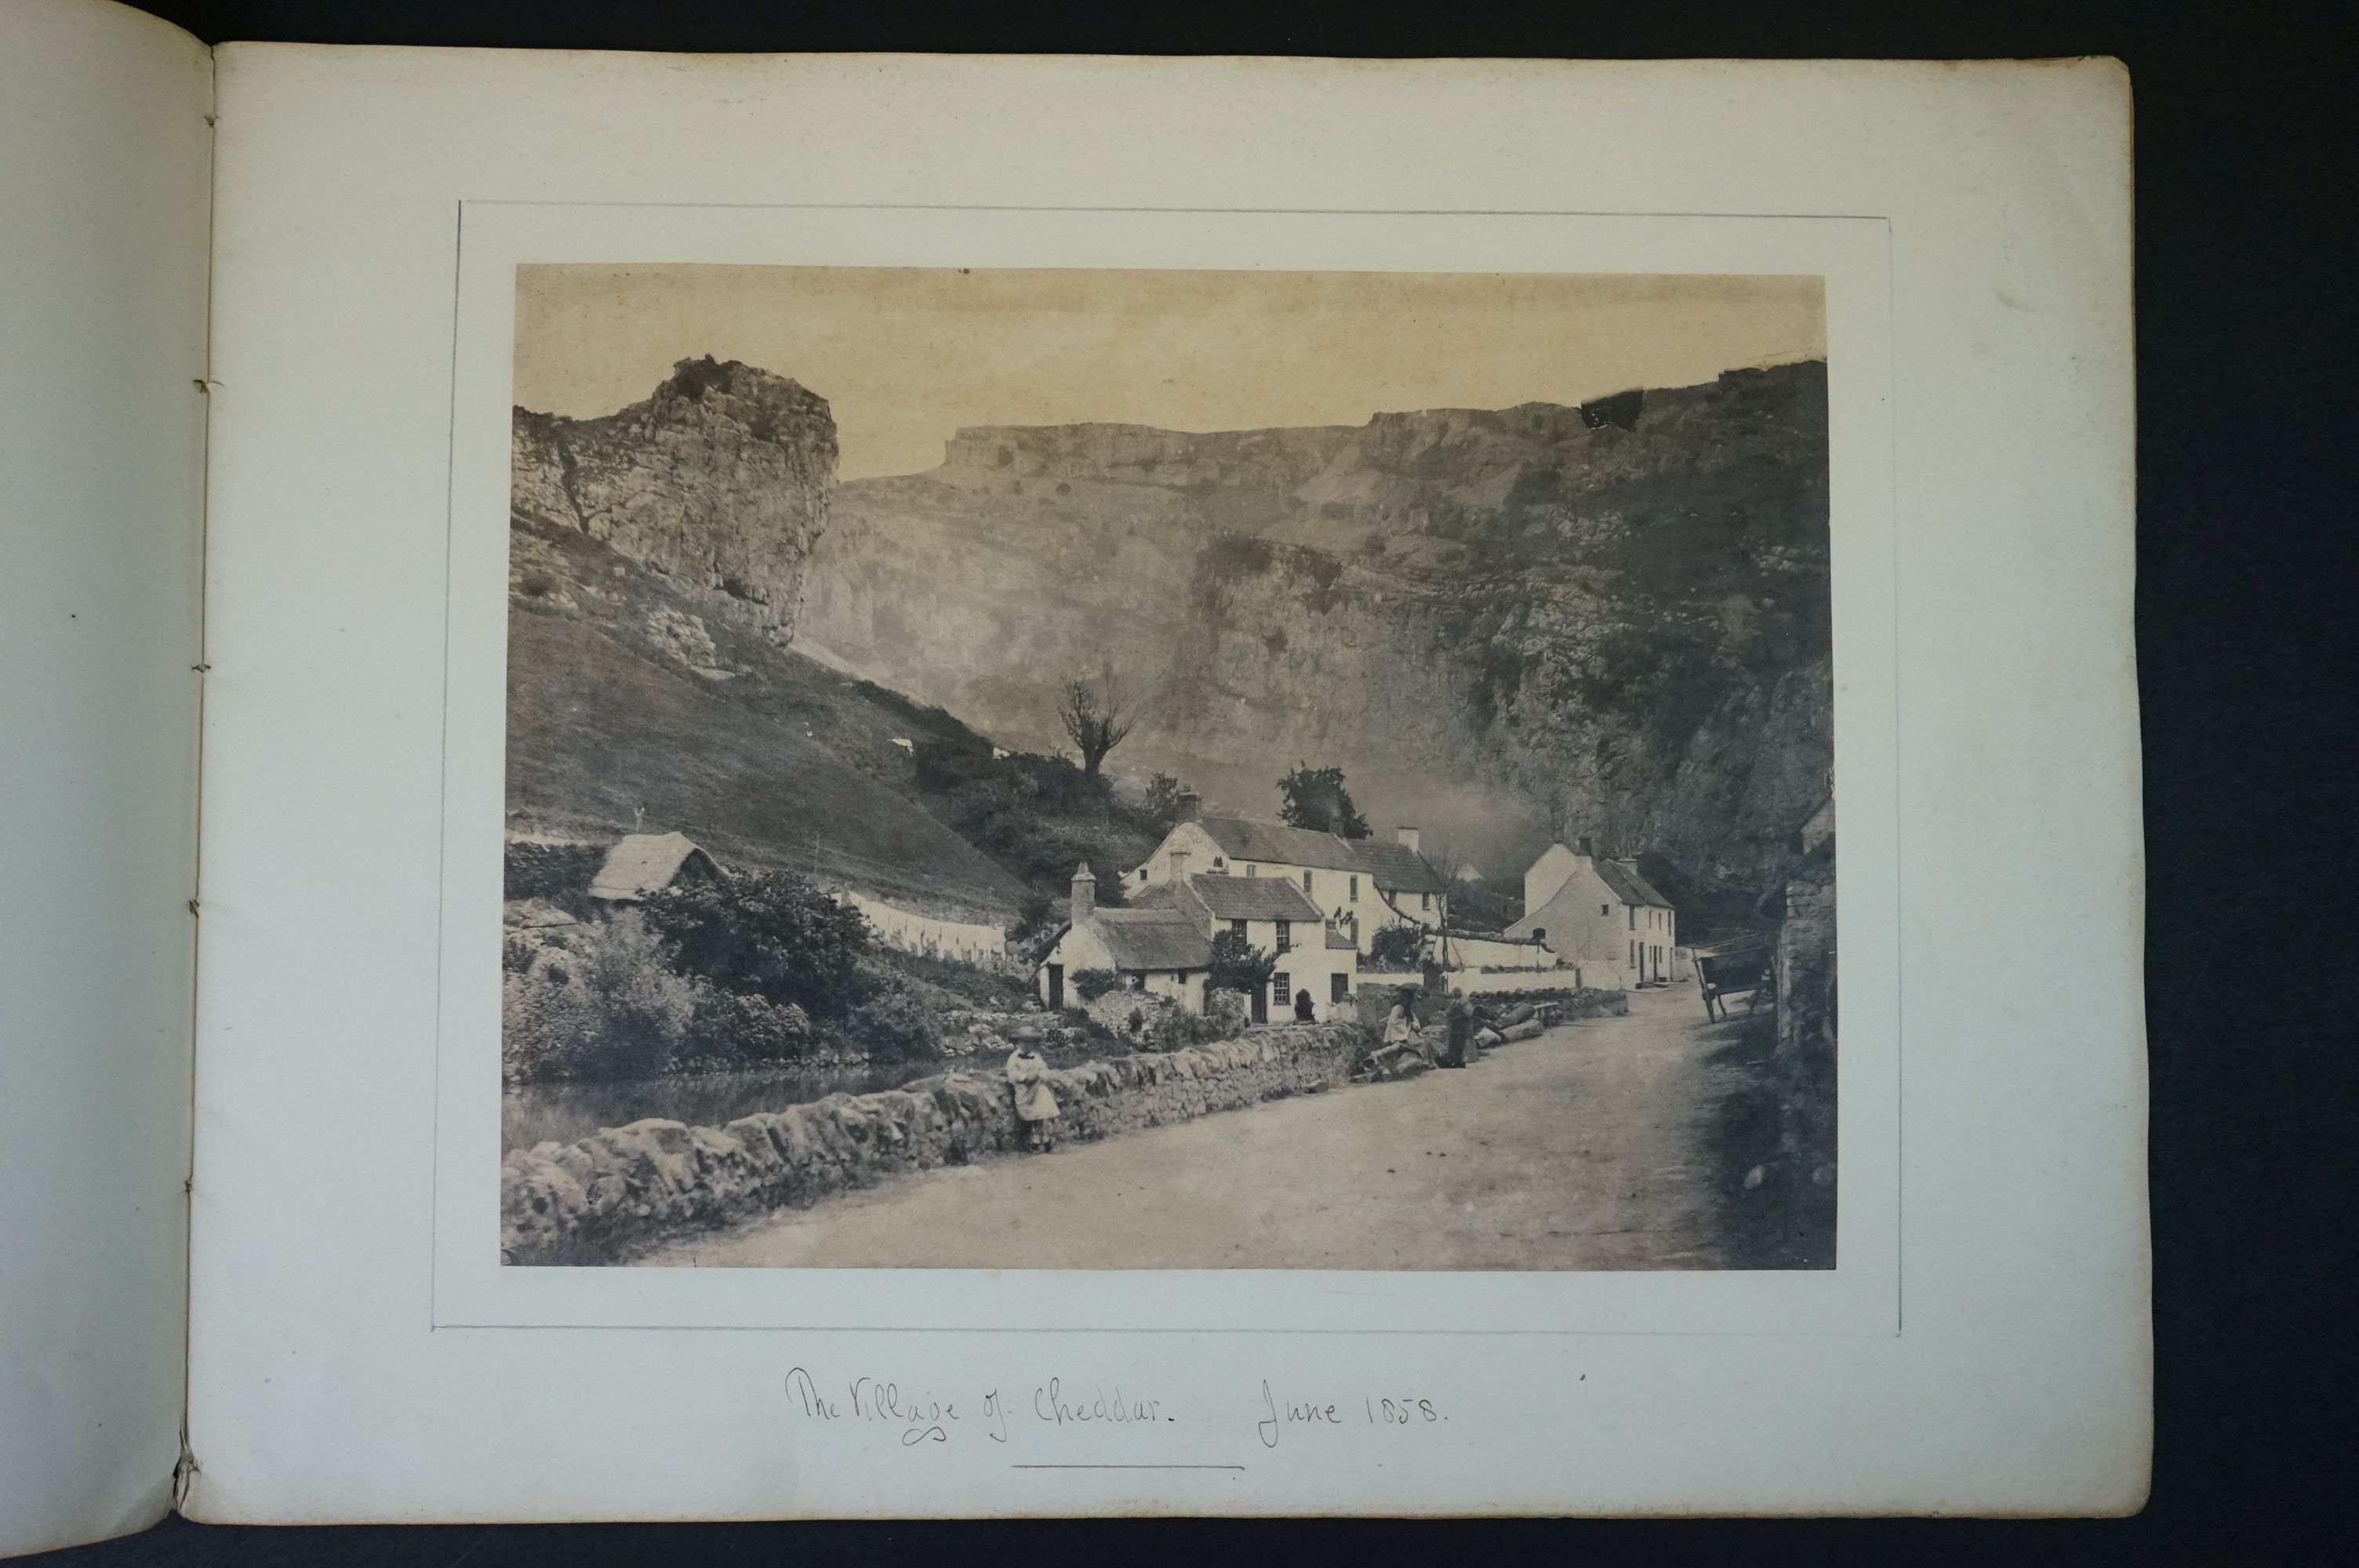 Photographic Illustrations by J.W.G. Gutch, M.R.C.S.L. Division No. 13. Deanery of Winchcombe. - Image 6 of 26